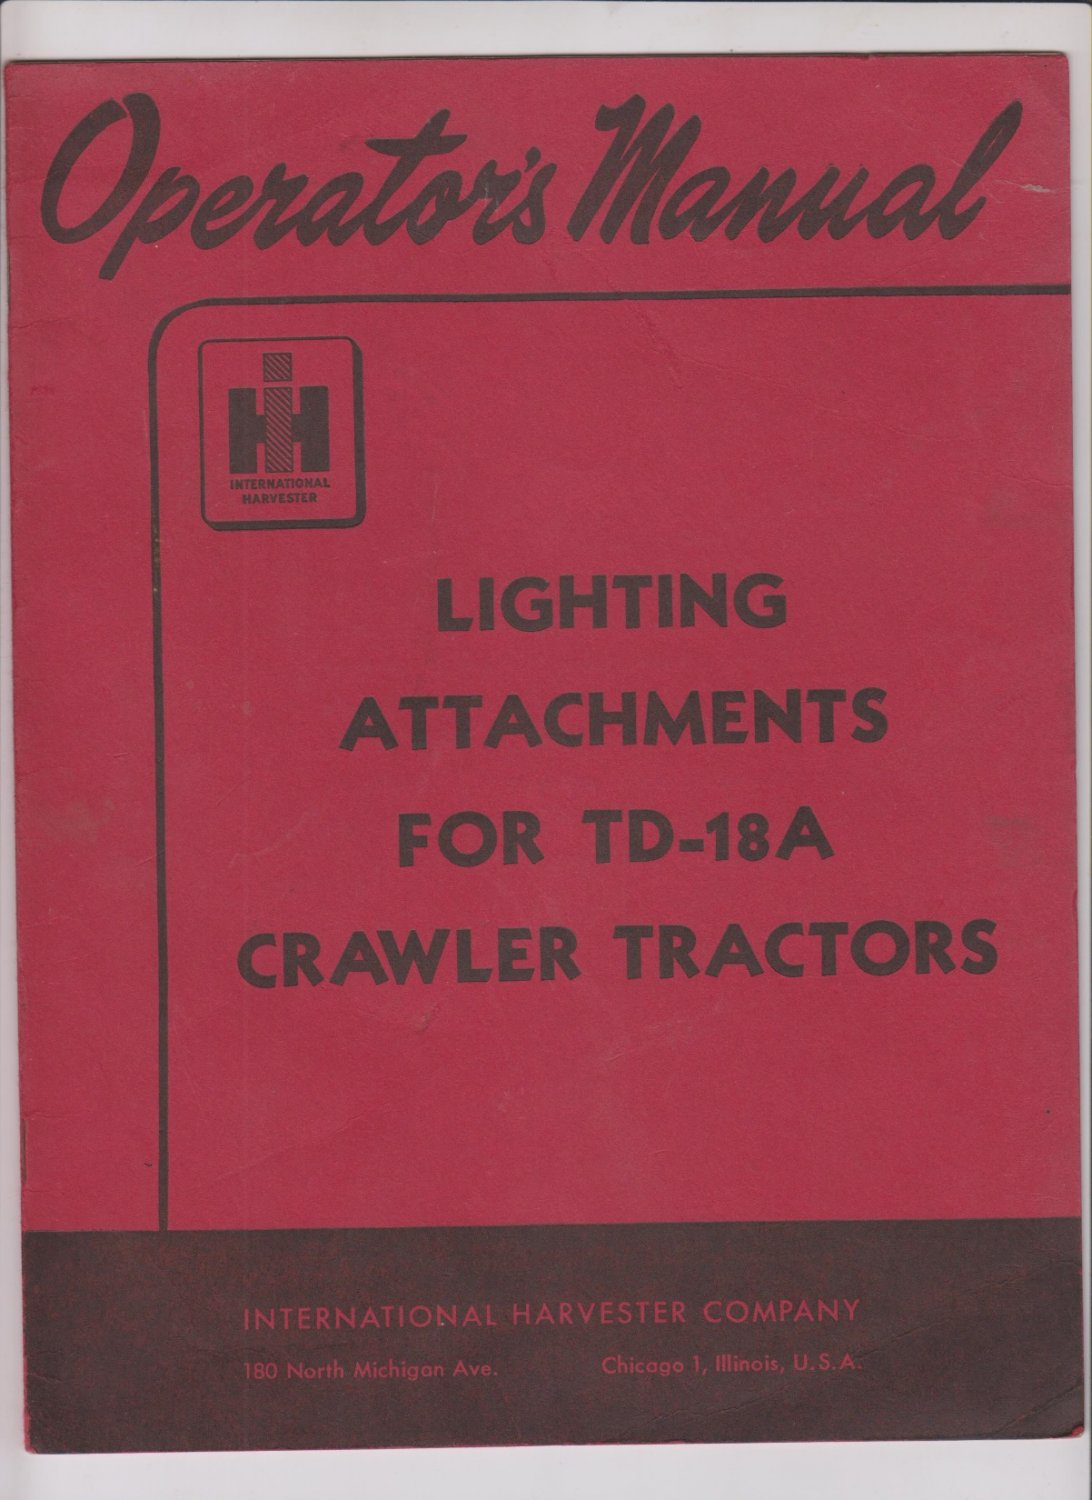 Operators Manual Lighting Attachments for TD-18A Crawler Tractor